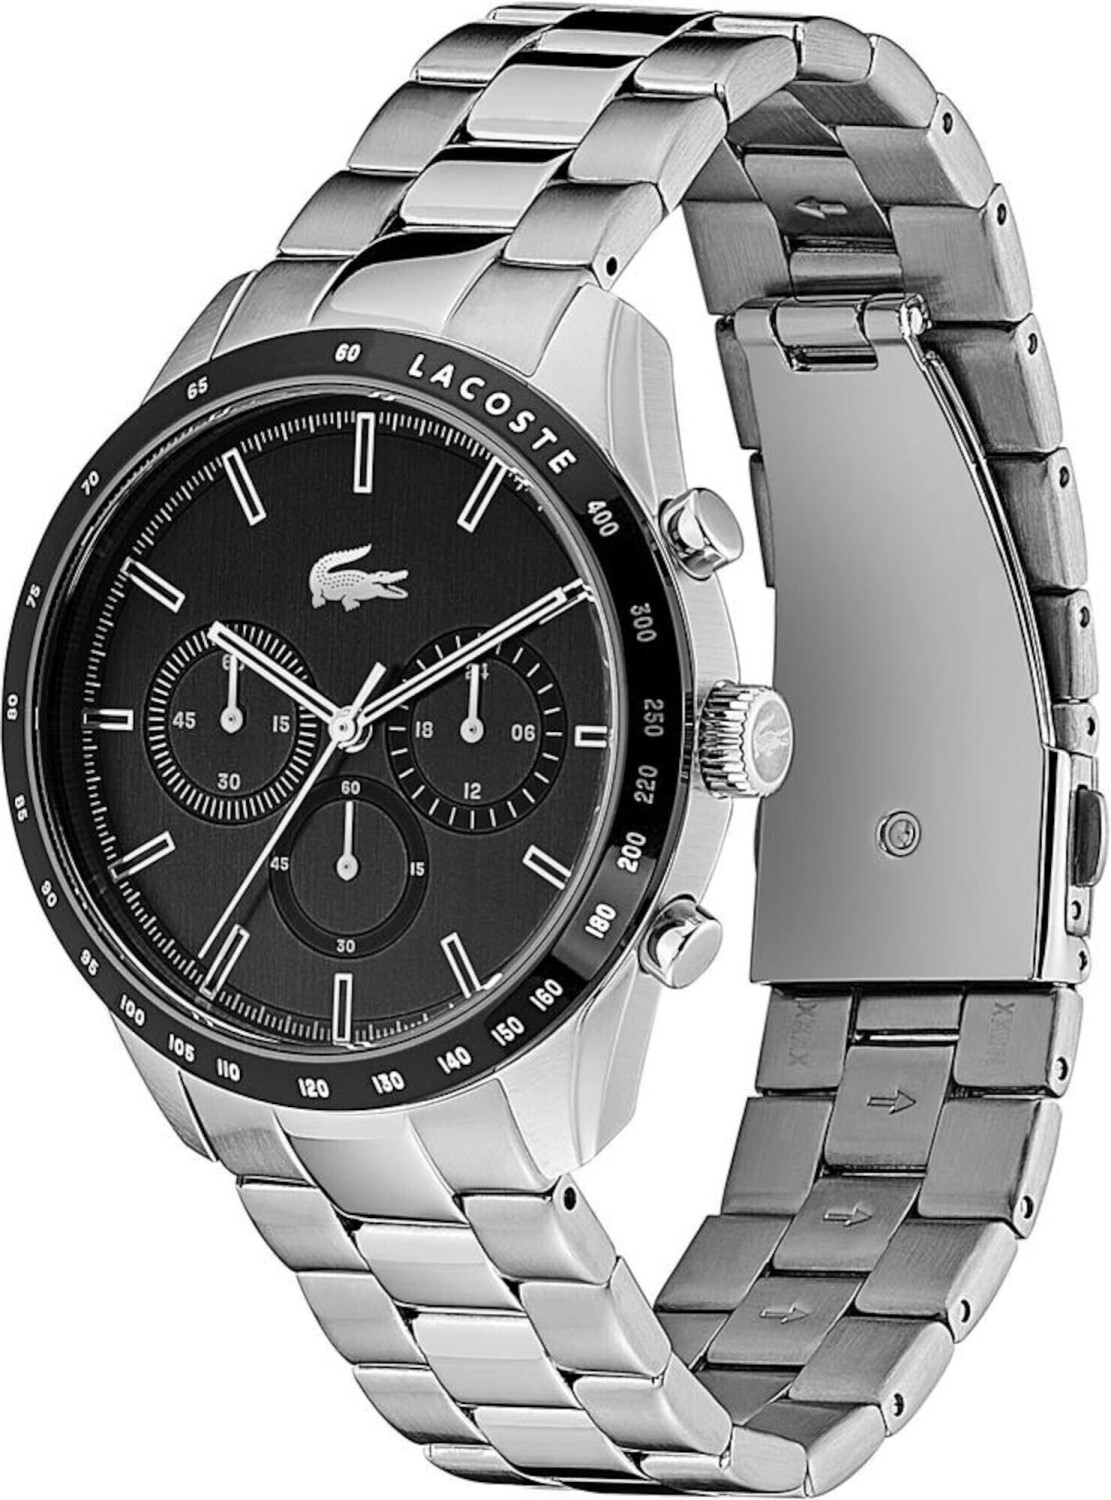 Buy Best Deals Lacoste – on from £122.42 Chronograph (Today) Boston